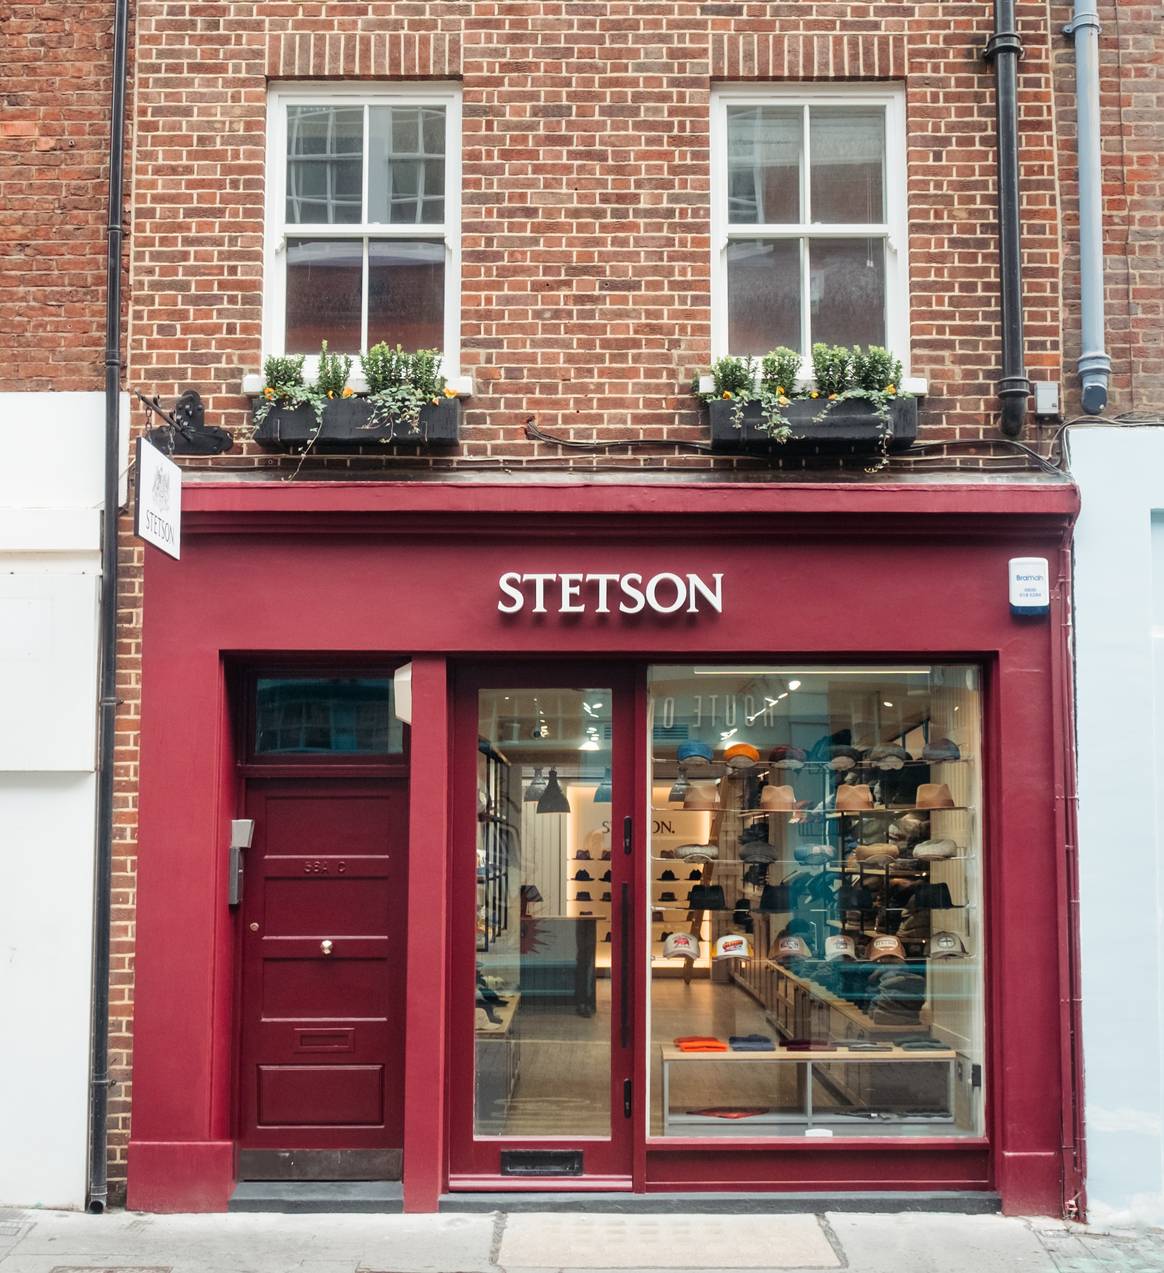 Image: Stetson; London store by Tom Cubis